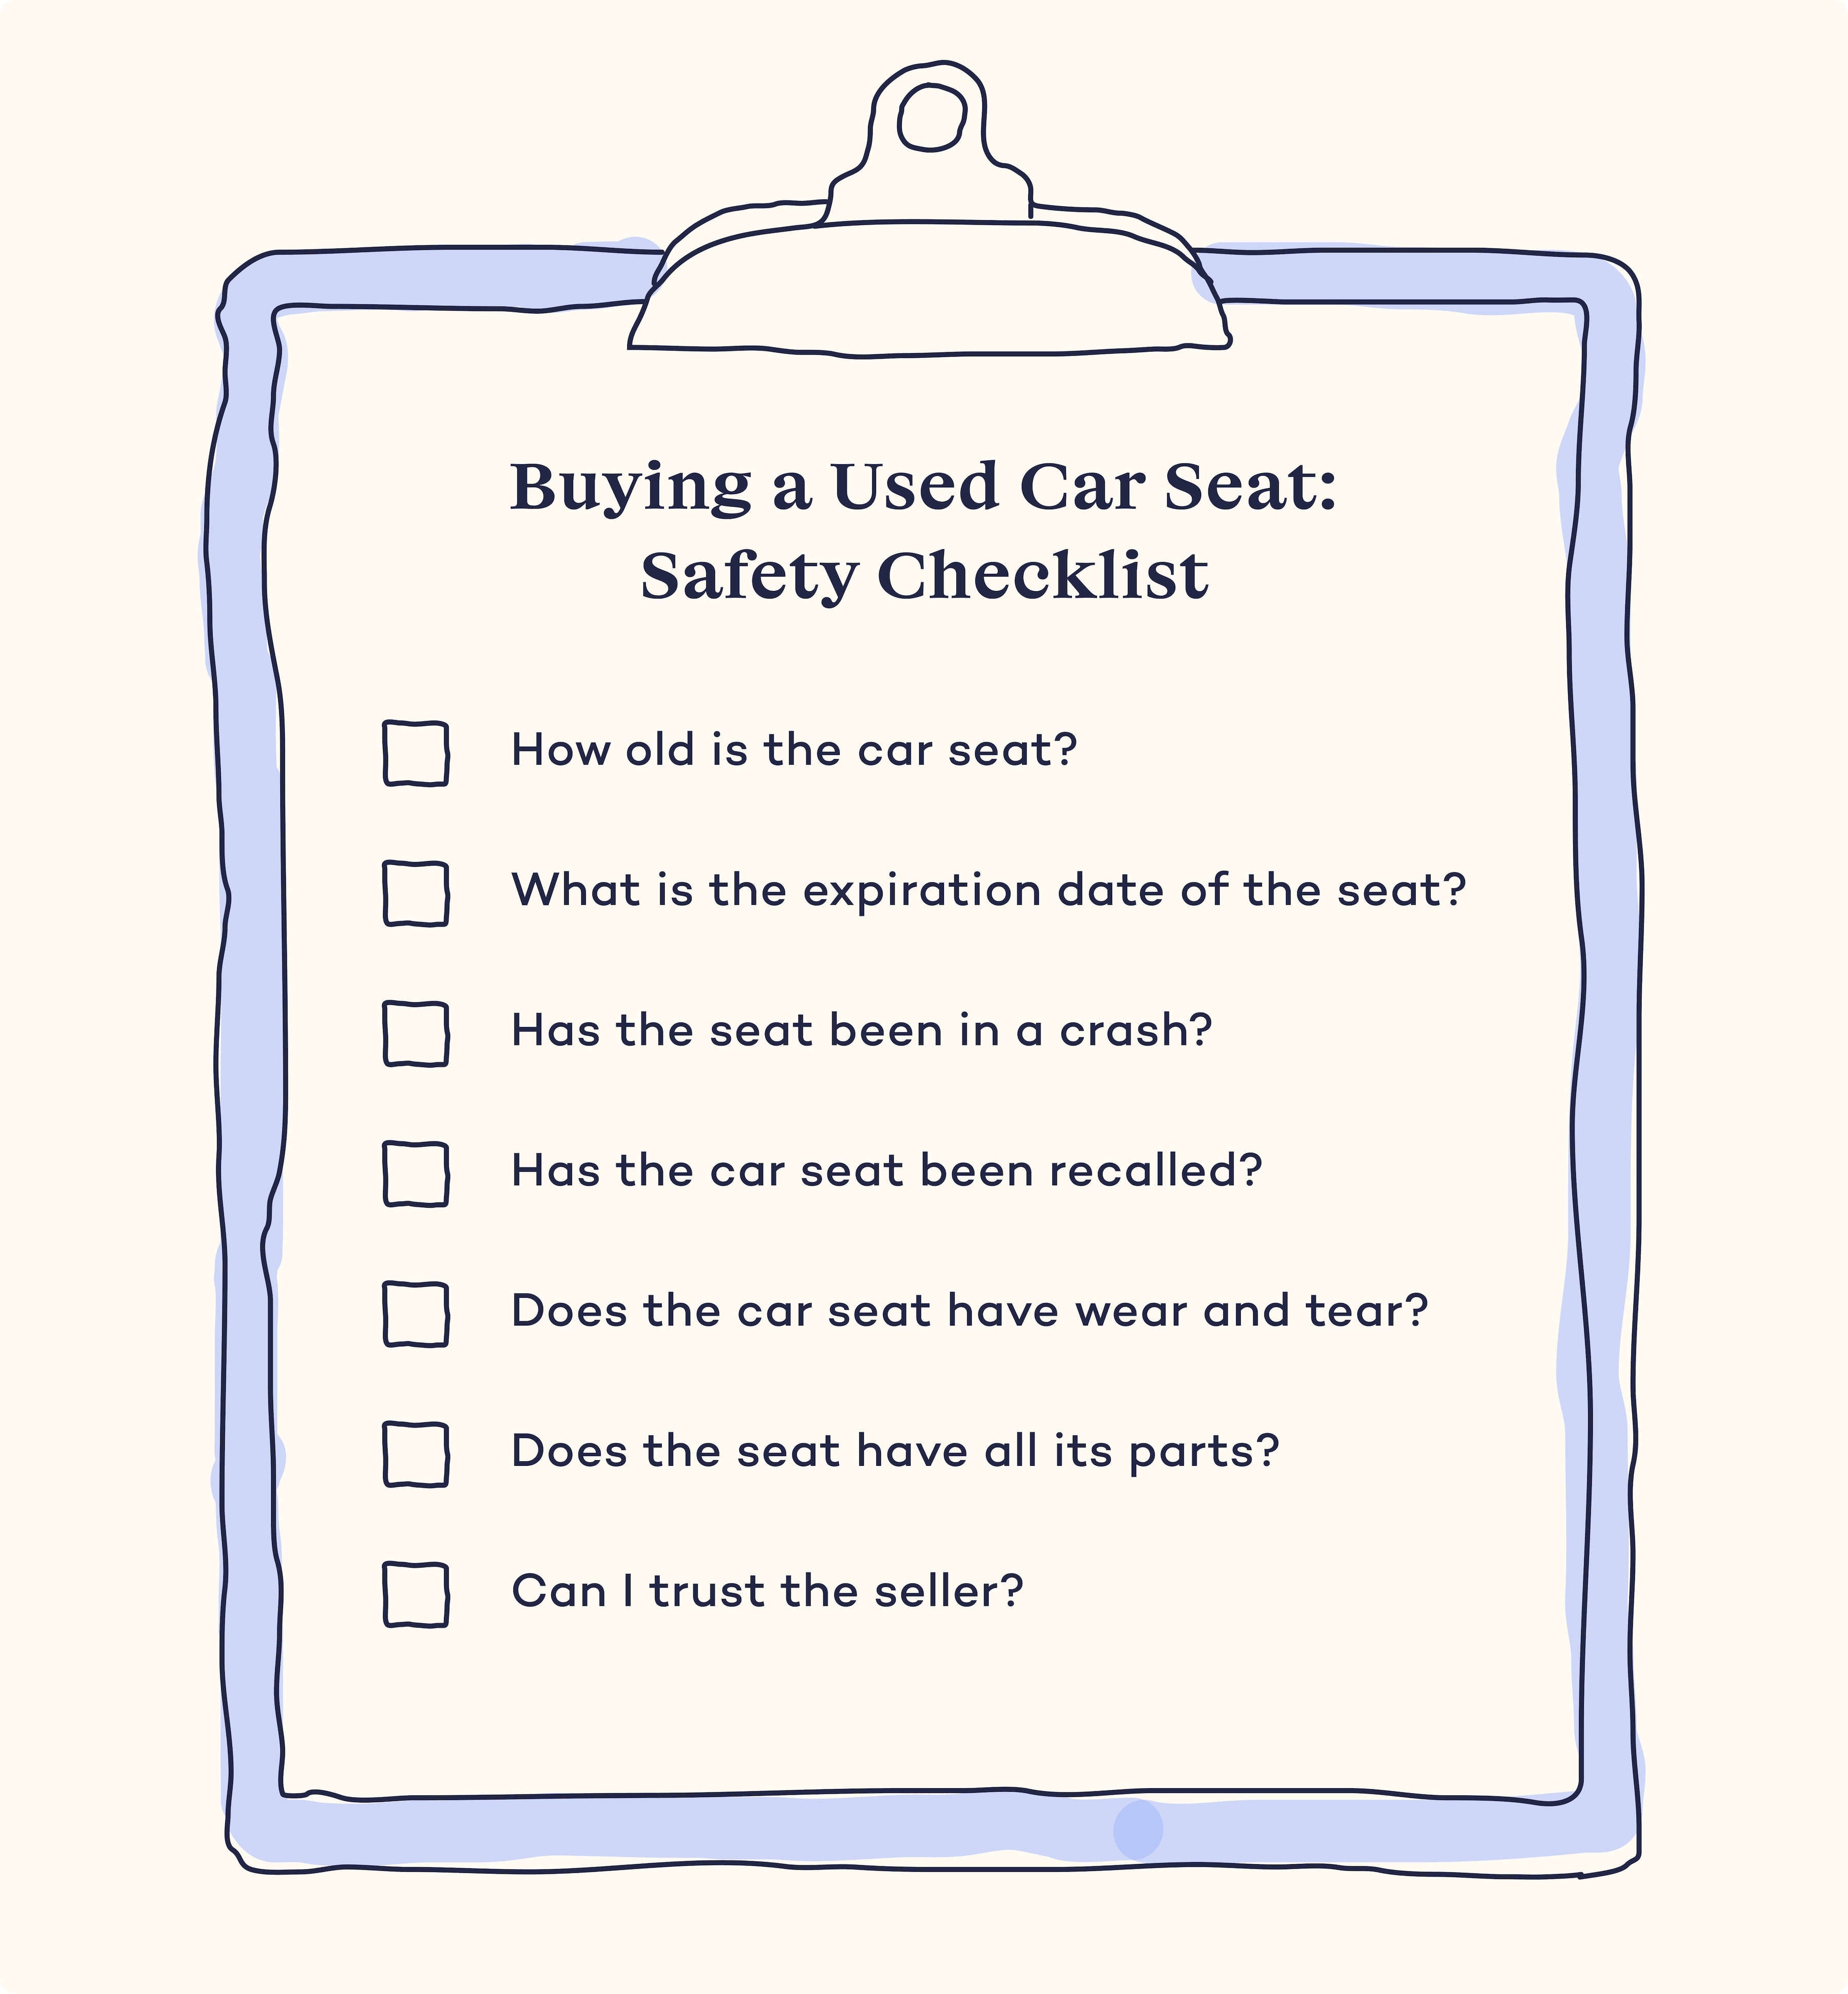 Buying a used car seat safely checklist 